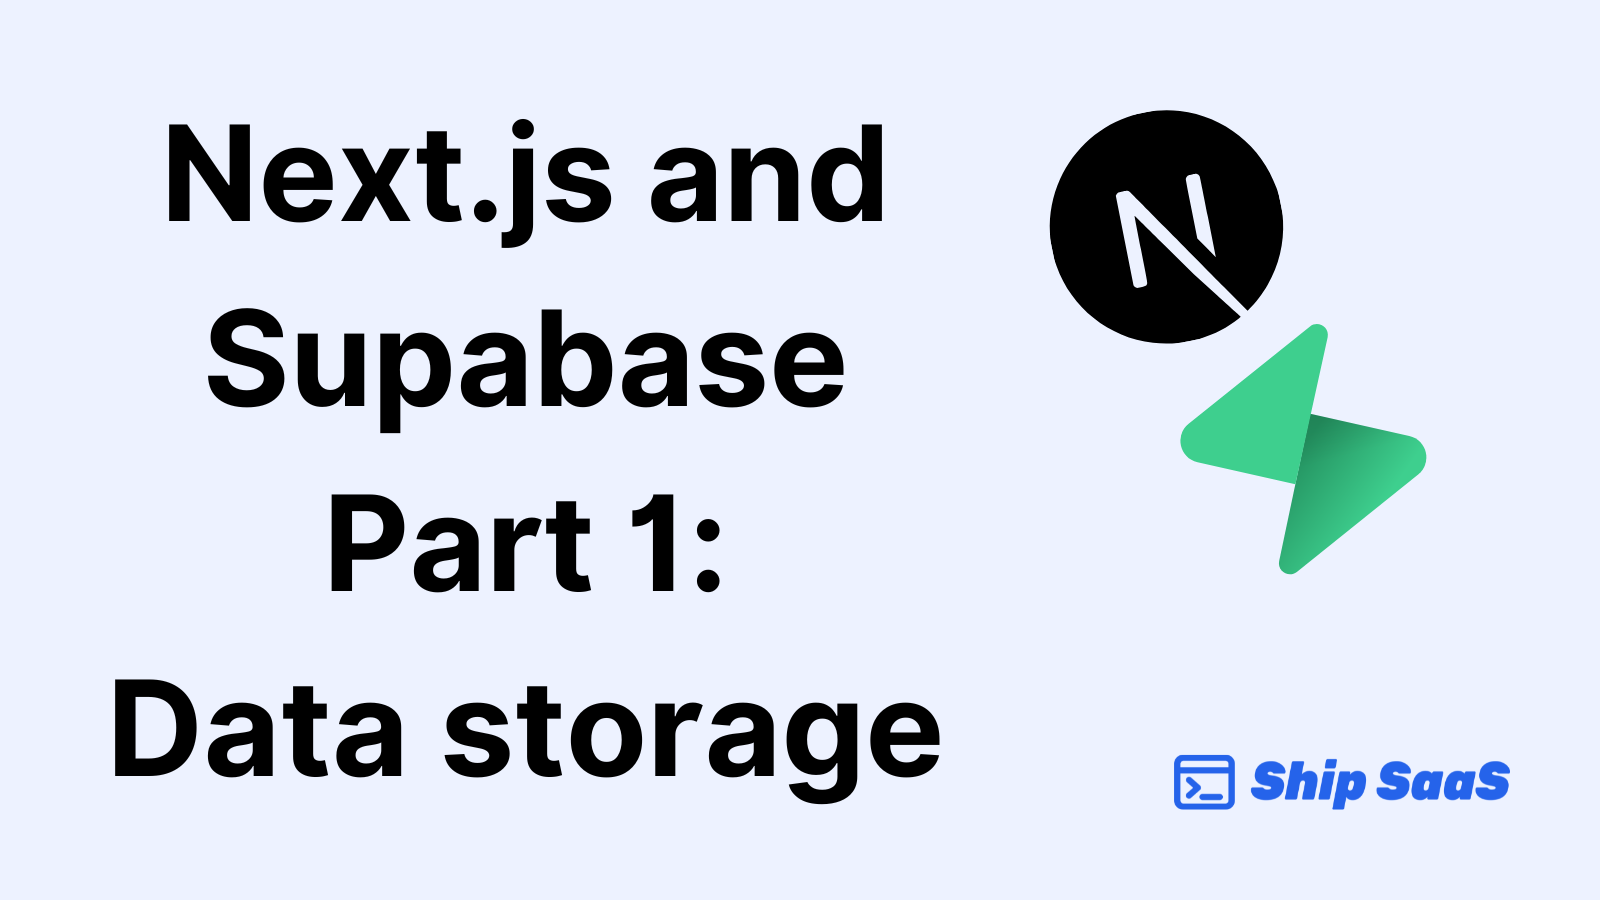 Get started with Next.js and Supabase - Part 1